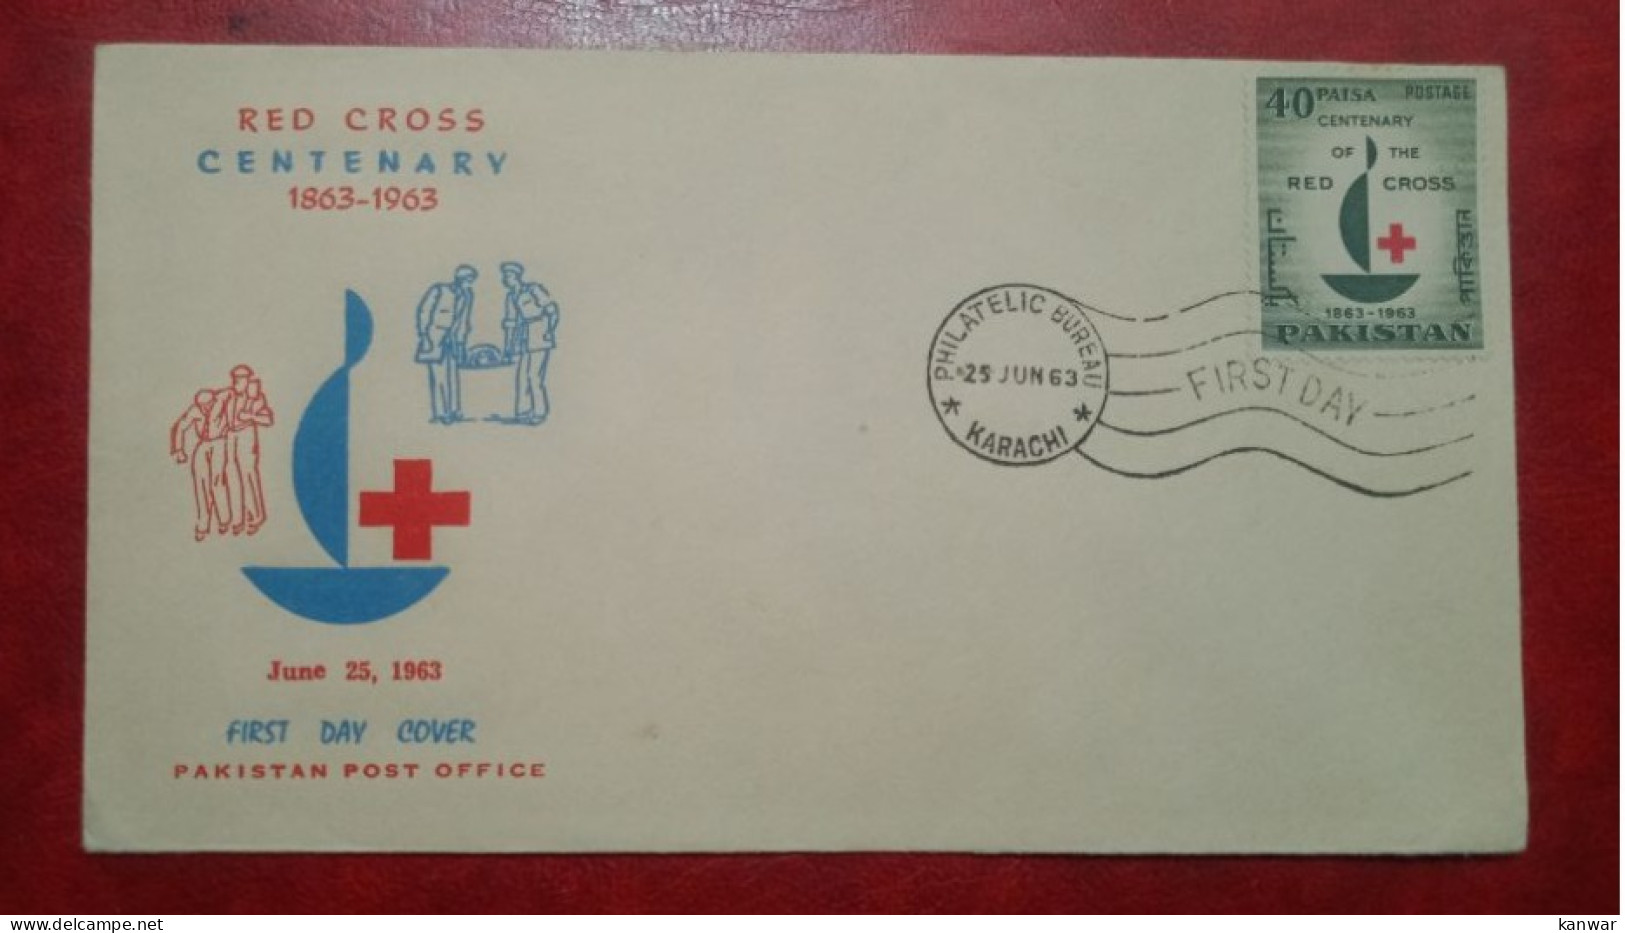 1963 PAKISTAN FDC COVER WITH STAMP RED CROSS CENTENARY - Pakistan